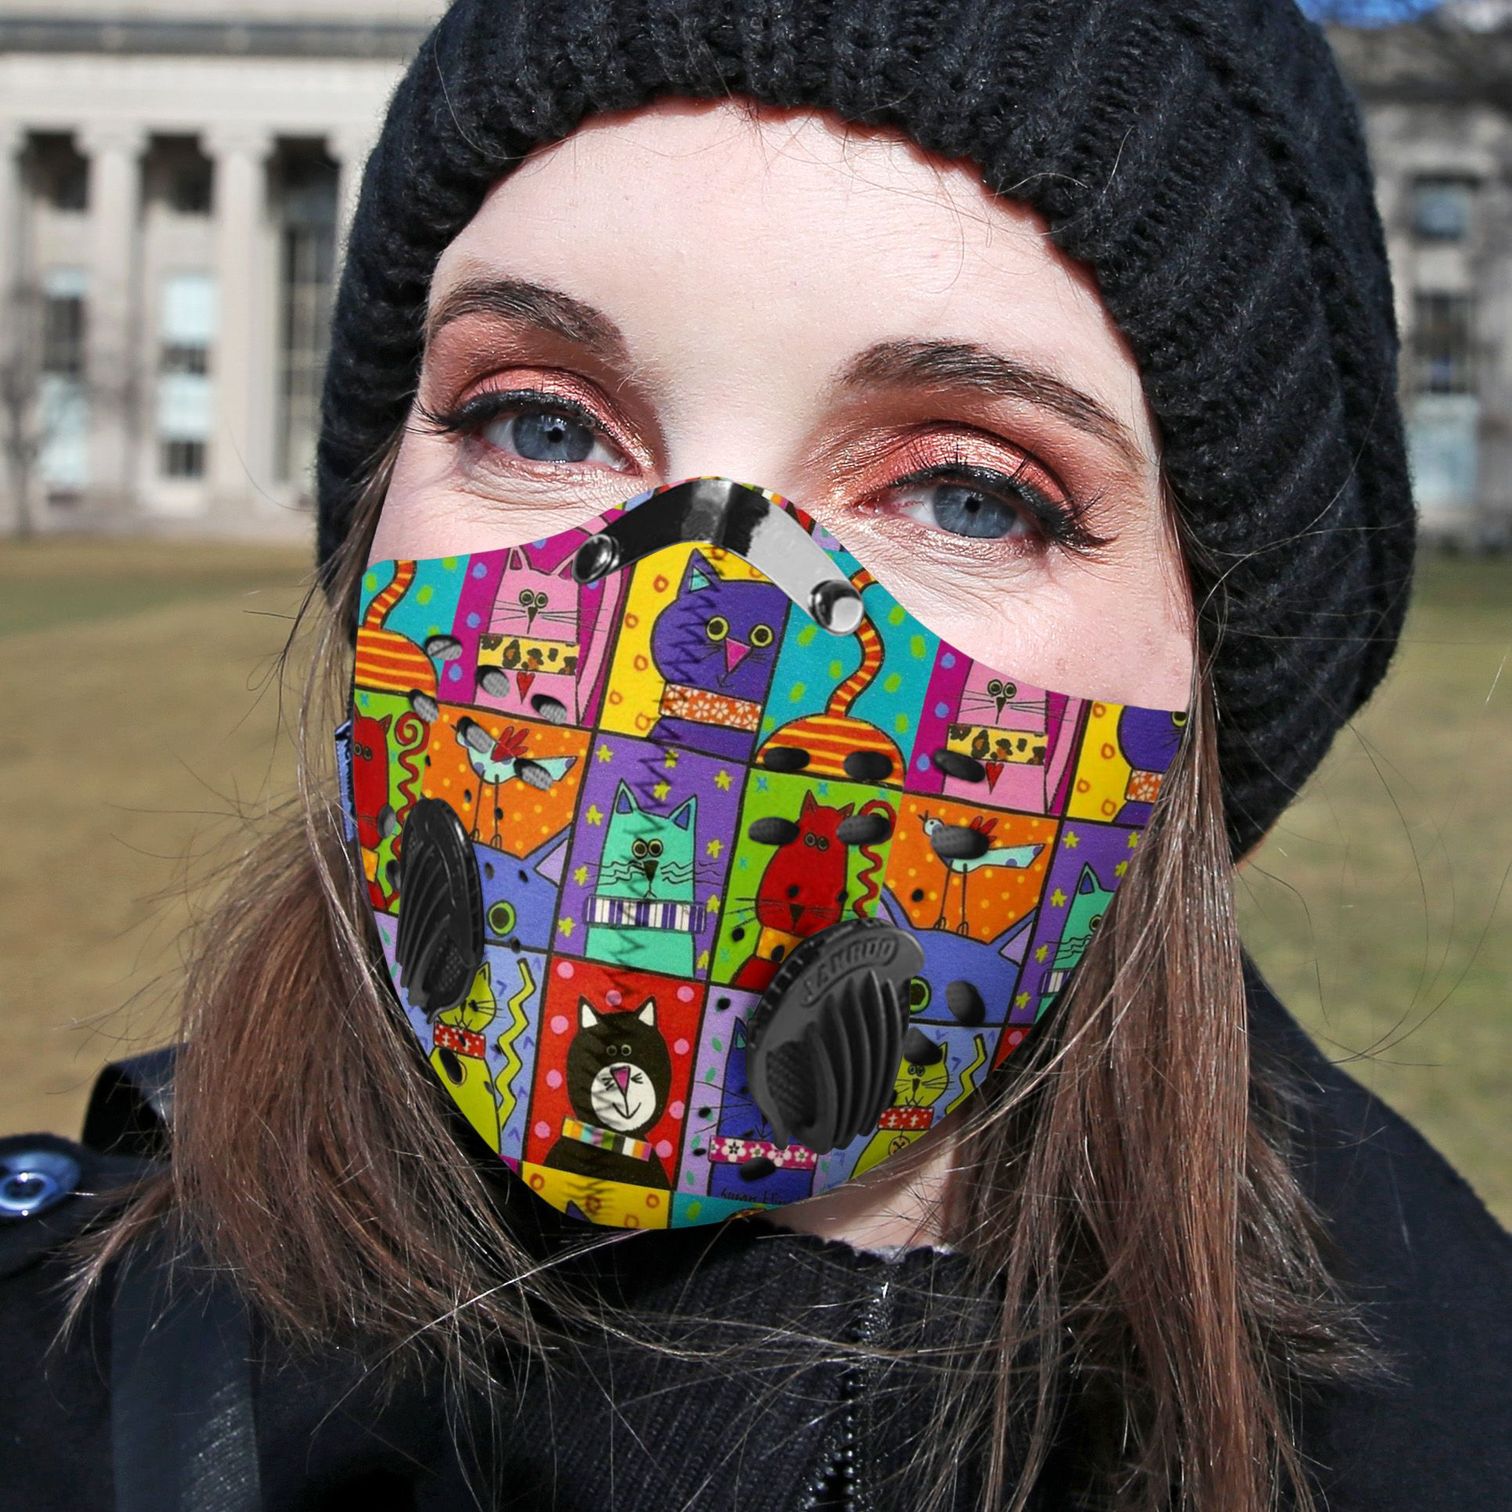 CAMBRIDGE, MA - 2/12/2020: Molly Kruko has a compromised immune system wears a protective mask just about all the time works at MIT.  (David L Ryan/Globe Staff ) SECTION: METRO TOPIC 527